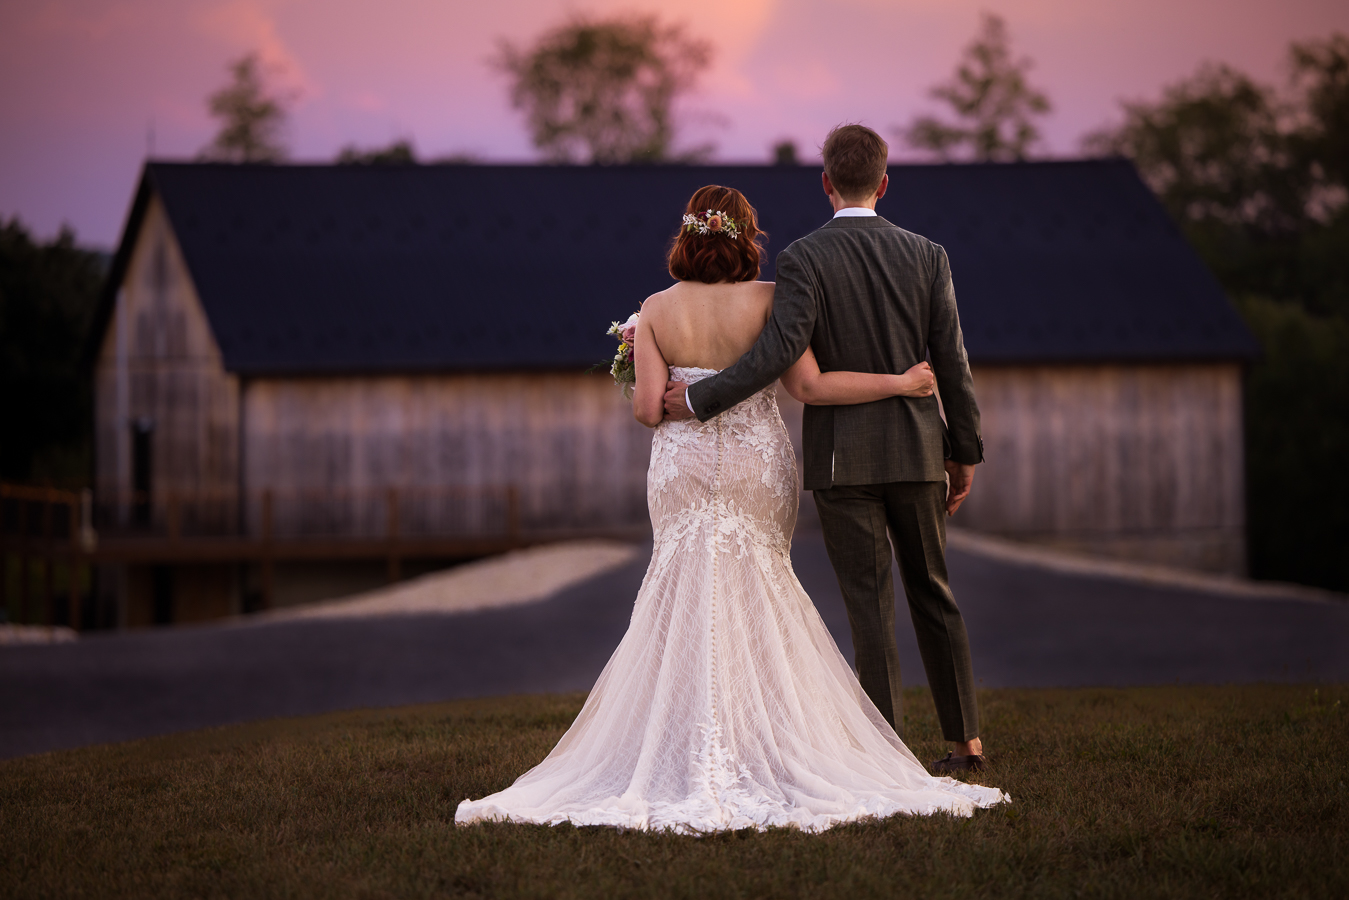 central pa wedding photographer, lisa rhinehart, captures this creative, vibrant image of the bride and groom as they stand side by side with their arms wrapped around each other facing the barn 